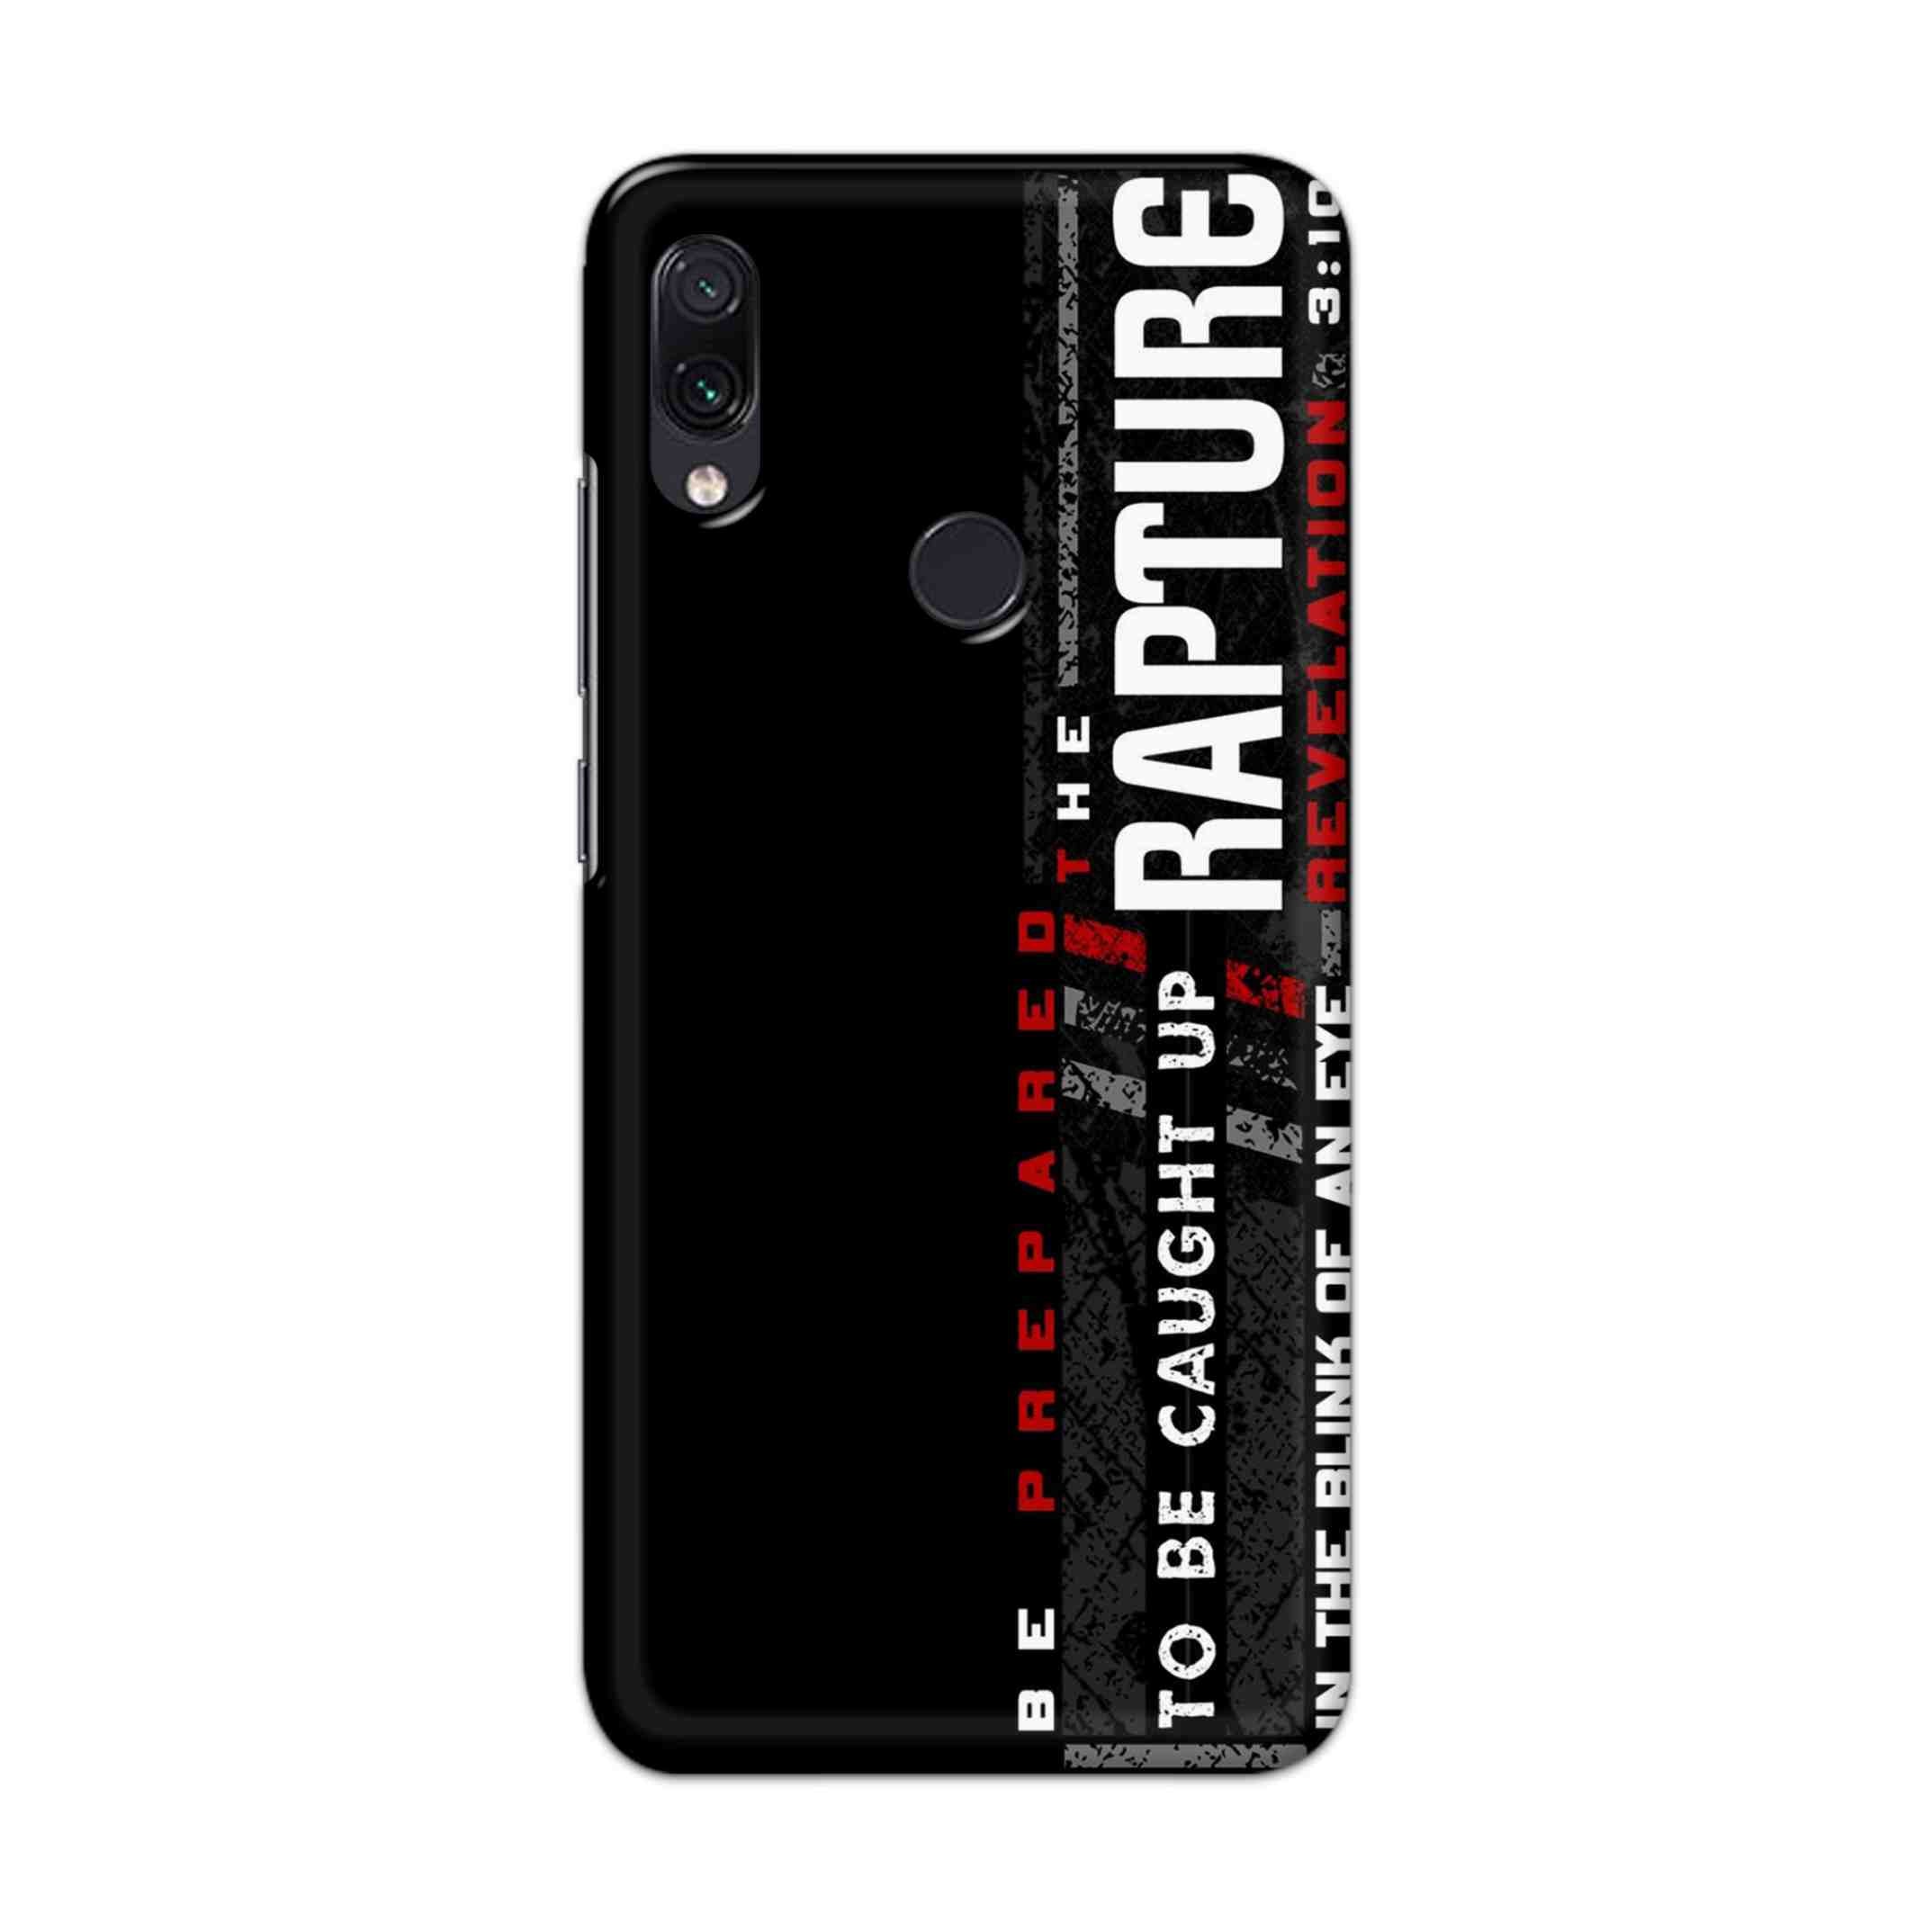 Buy Rapture Hard Back Mobile Phone Case Cover For Redmi Note 7 / Note 7 Pro Online